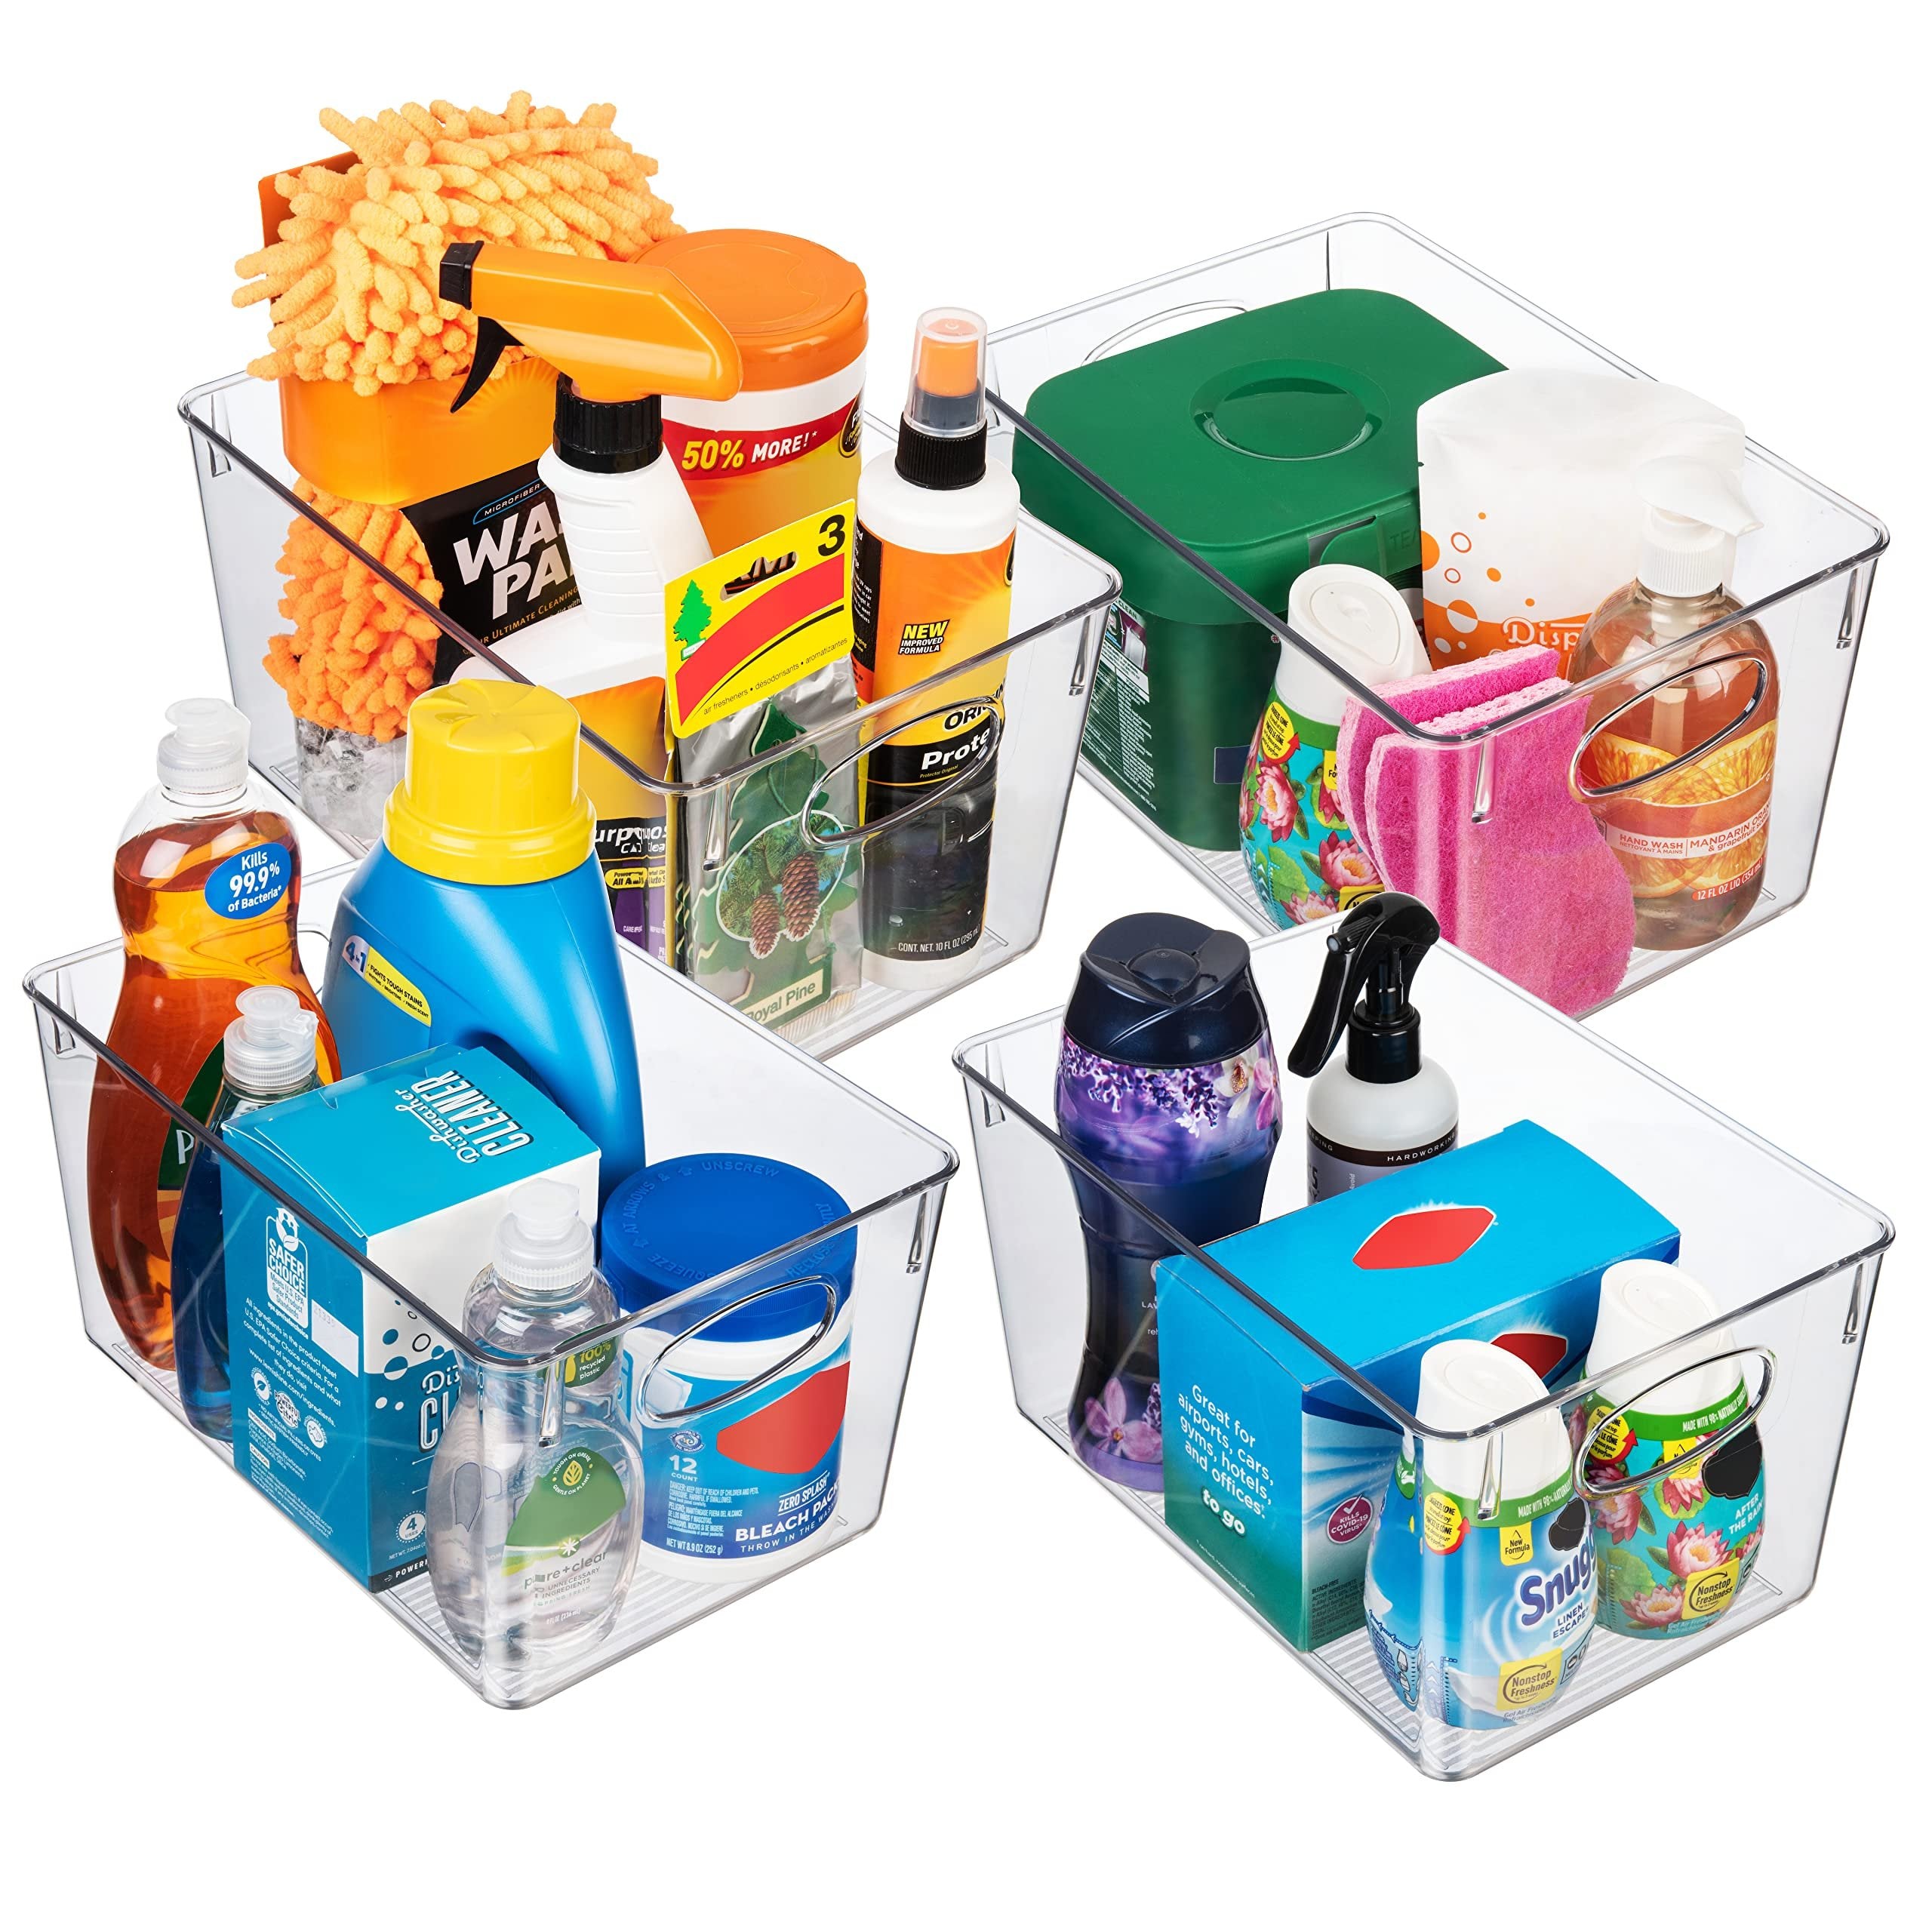 CLEARSPACE Plastic Storage Bins With lids - Perfect Kitchen Organization or Pantry Storage - Fridge Organizer, Pantry Organization and Storage Bins, Cabinet Organizers - 4 Pack